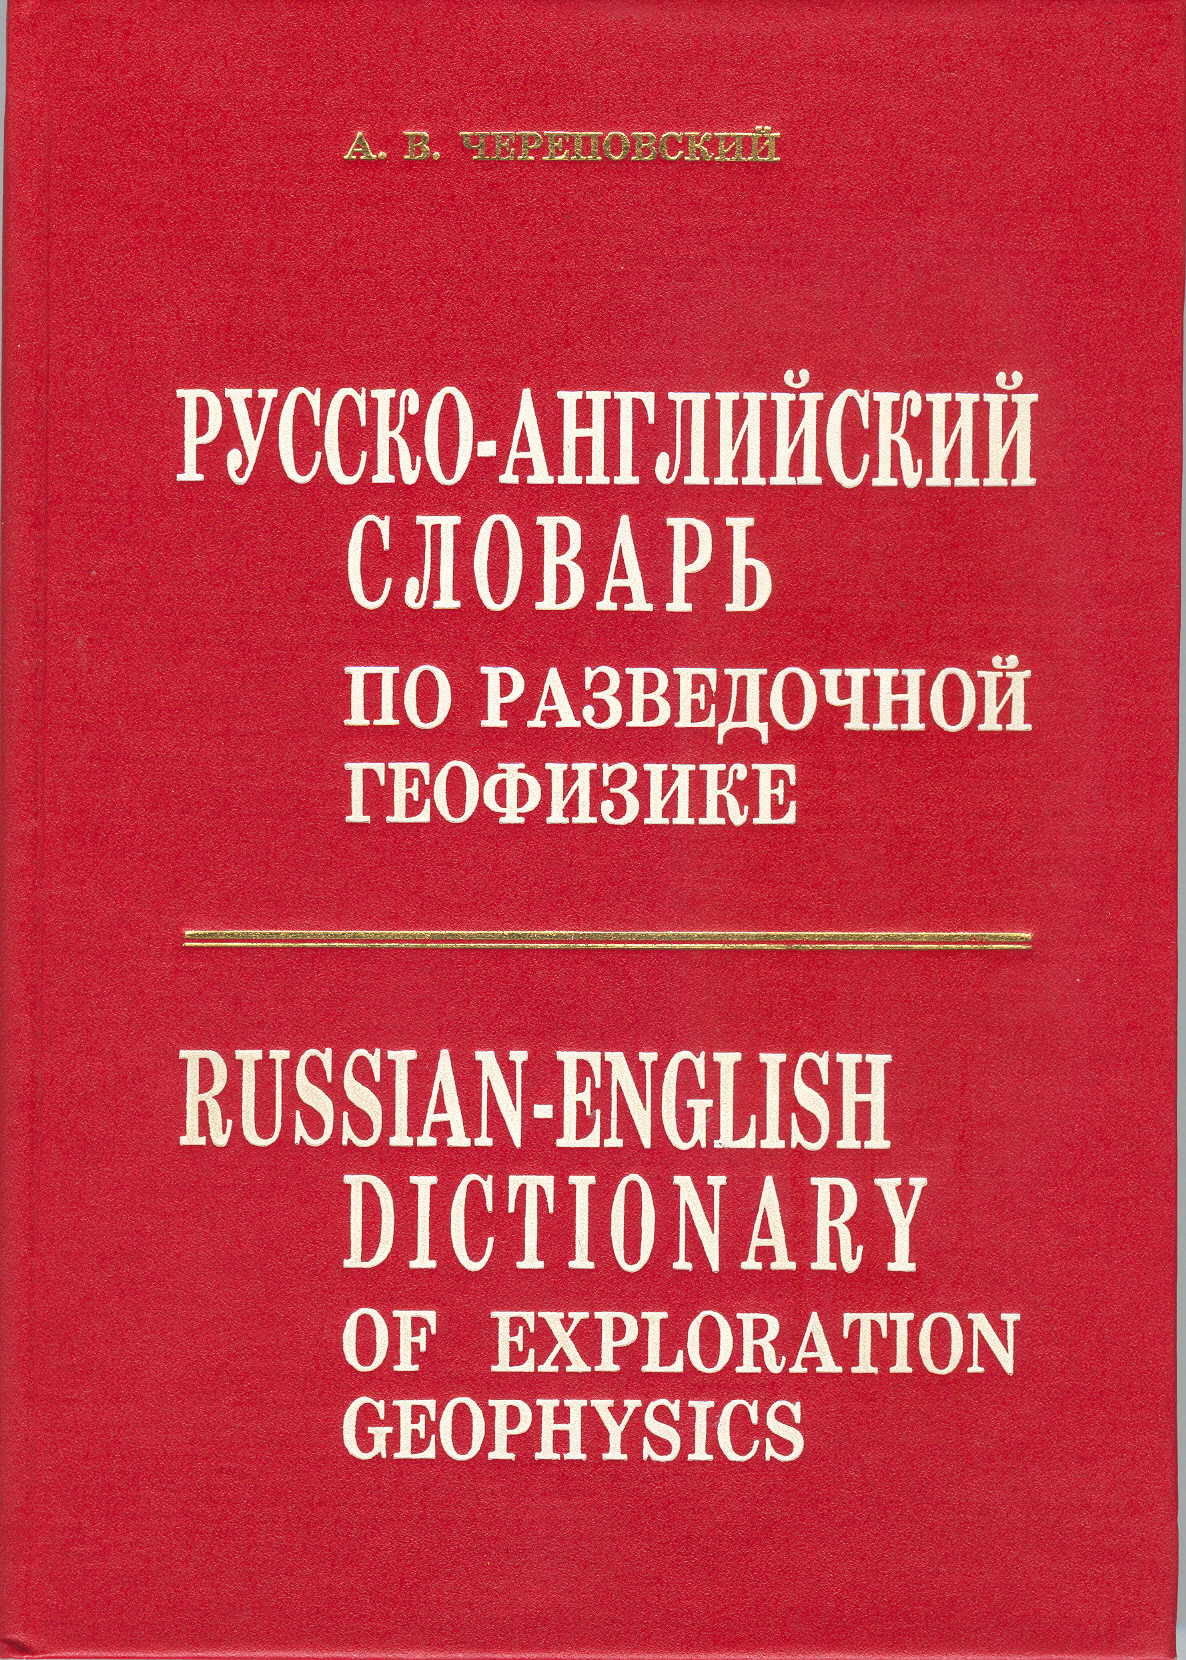 Dictionary The History Of Russian 19